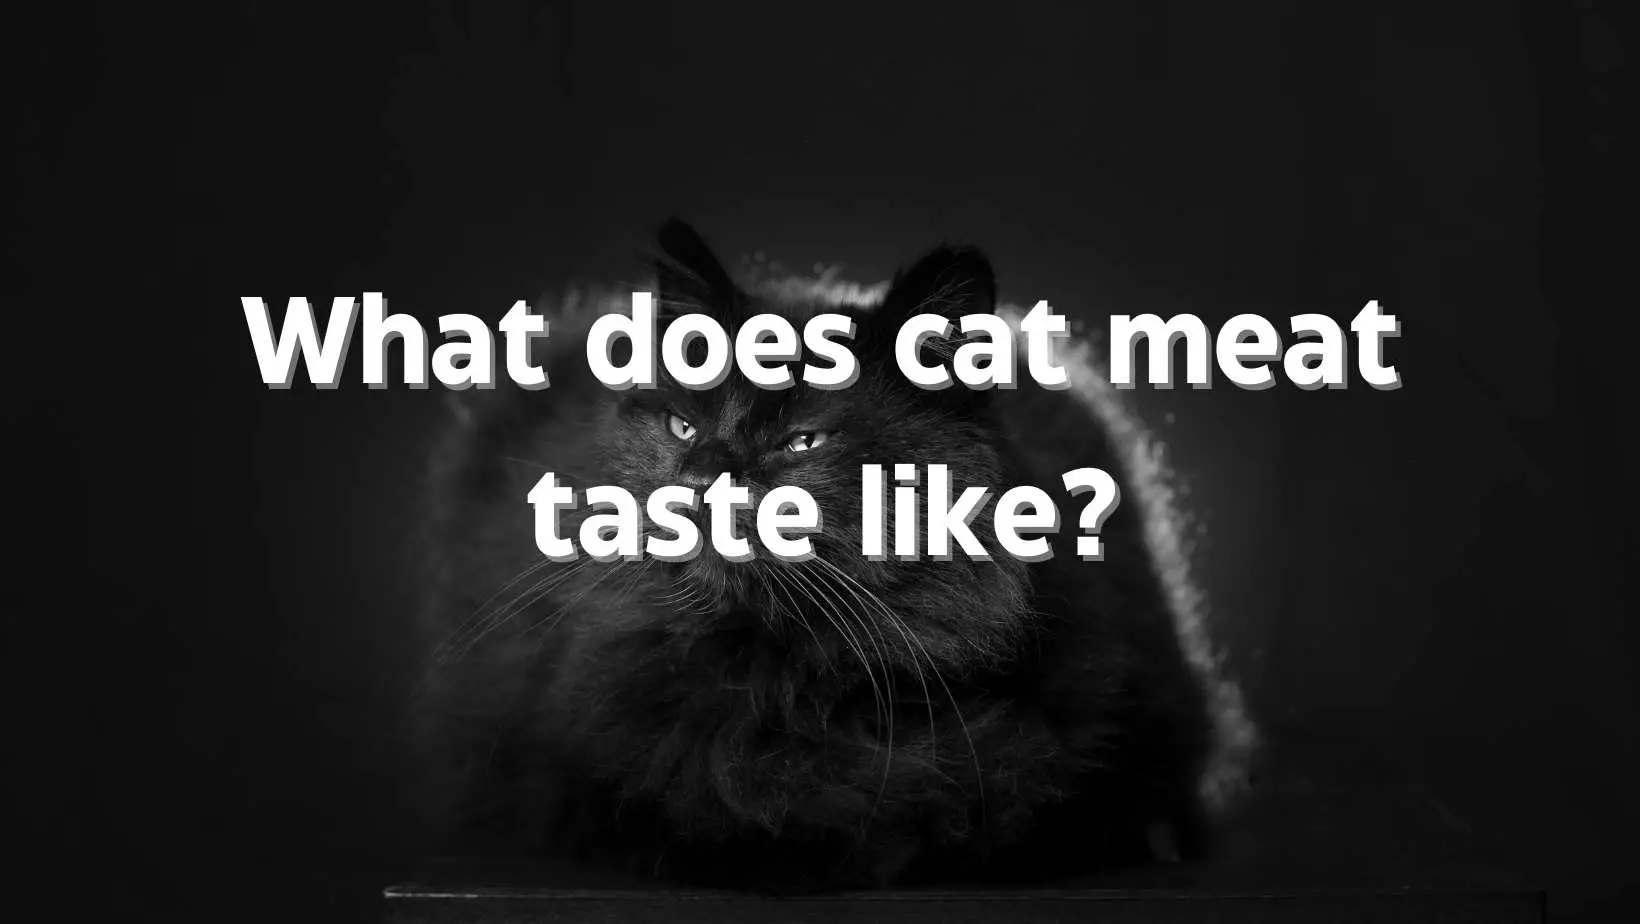 What does cat meat taste like?